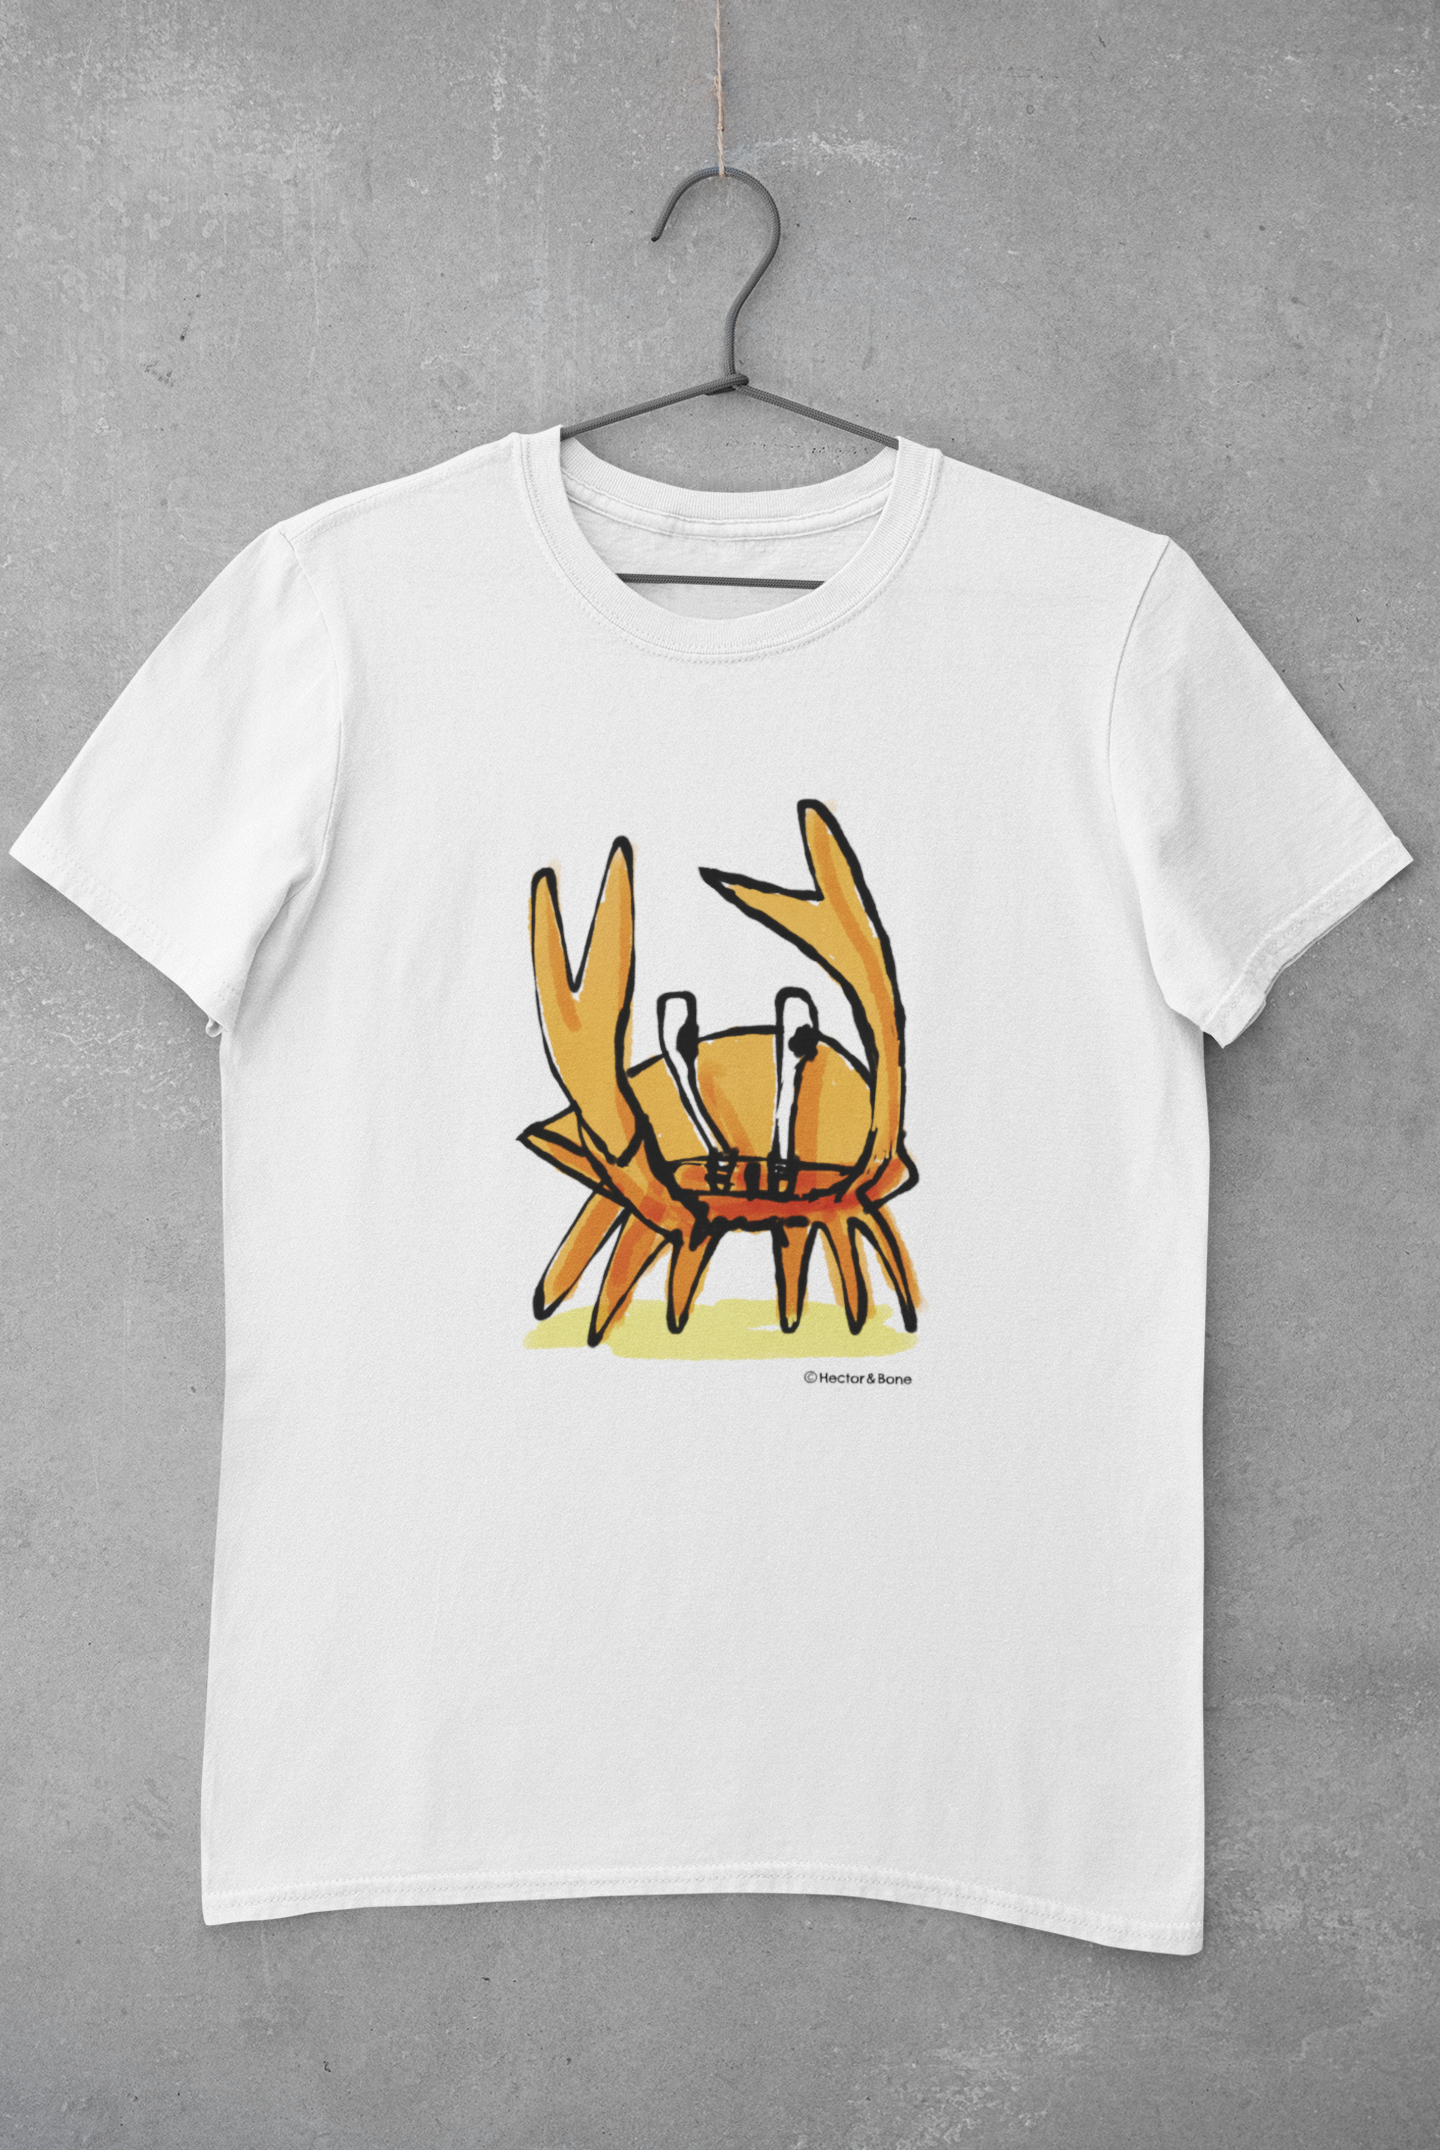 Crab T-shirt - Illustrated funny Angry Crab t-shirts printed on white vegan cotton by Hector and Bone